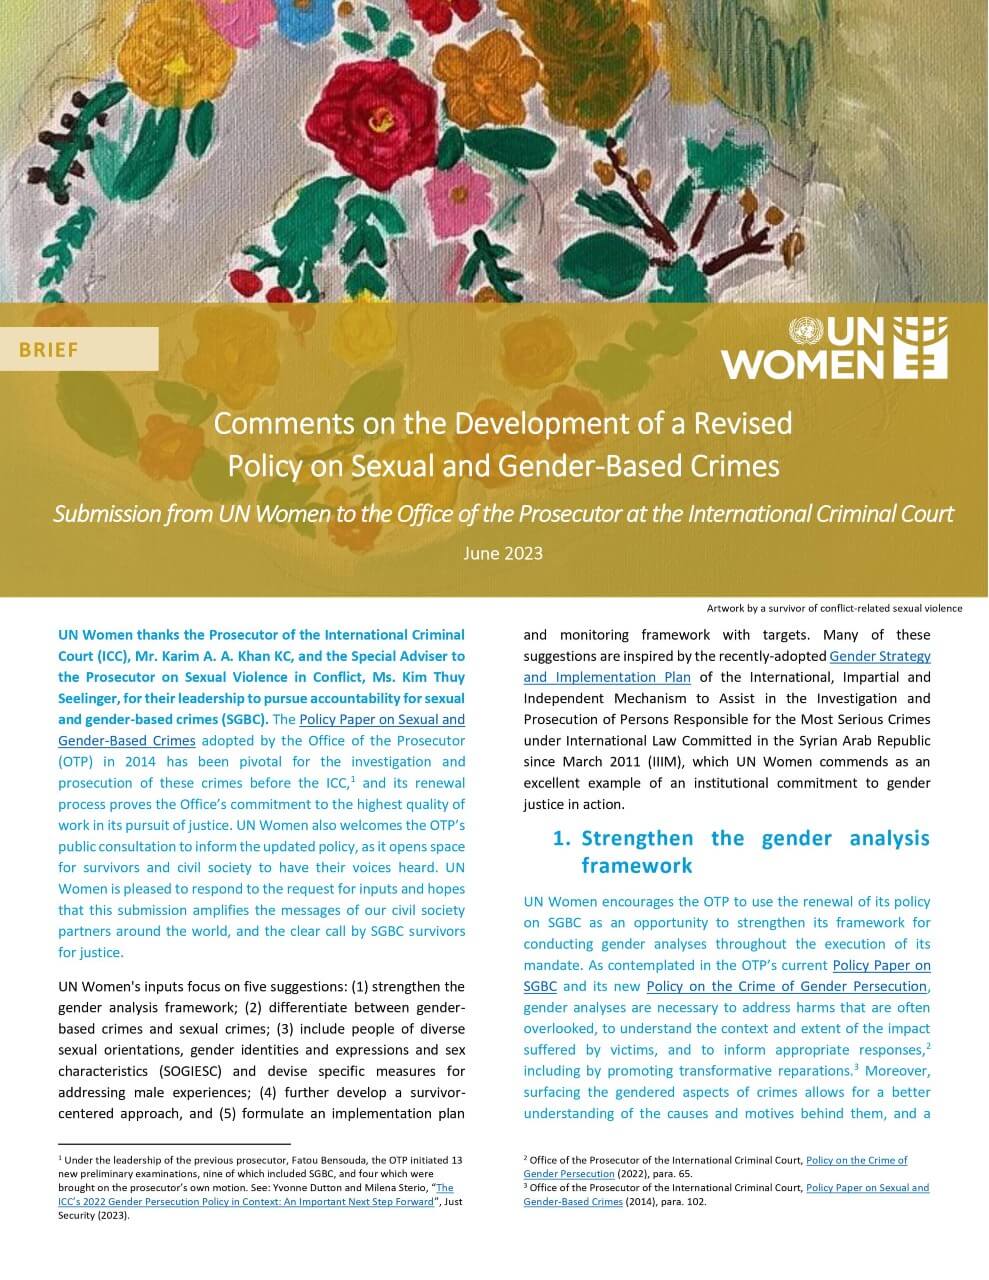 Comments on the development of a revised policy on sexual and gender-based crimes: Submission from UN Women to the Office of the Prosecutor at the International Criminal Court